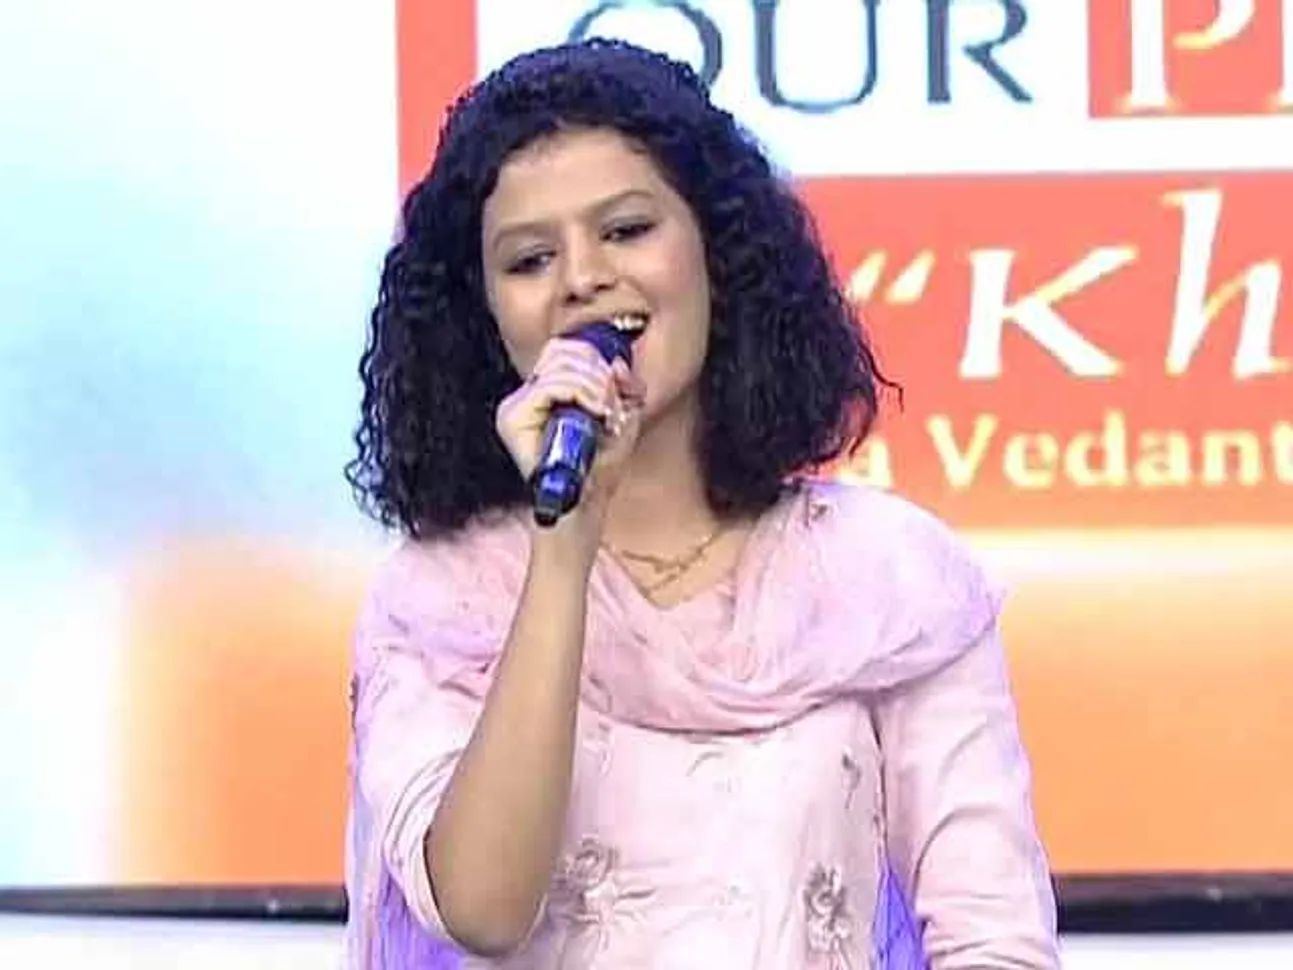 Performance by Palak Muchhal at the Telethon